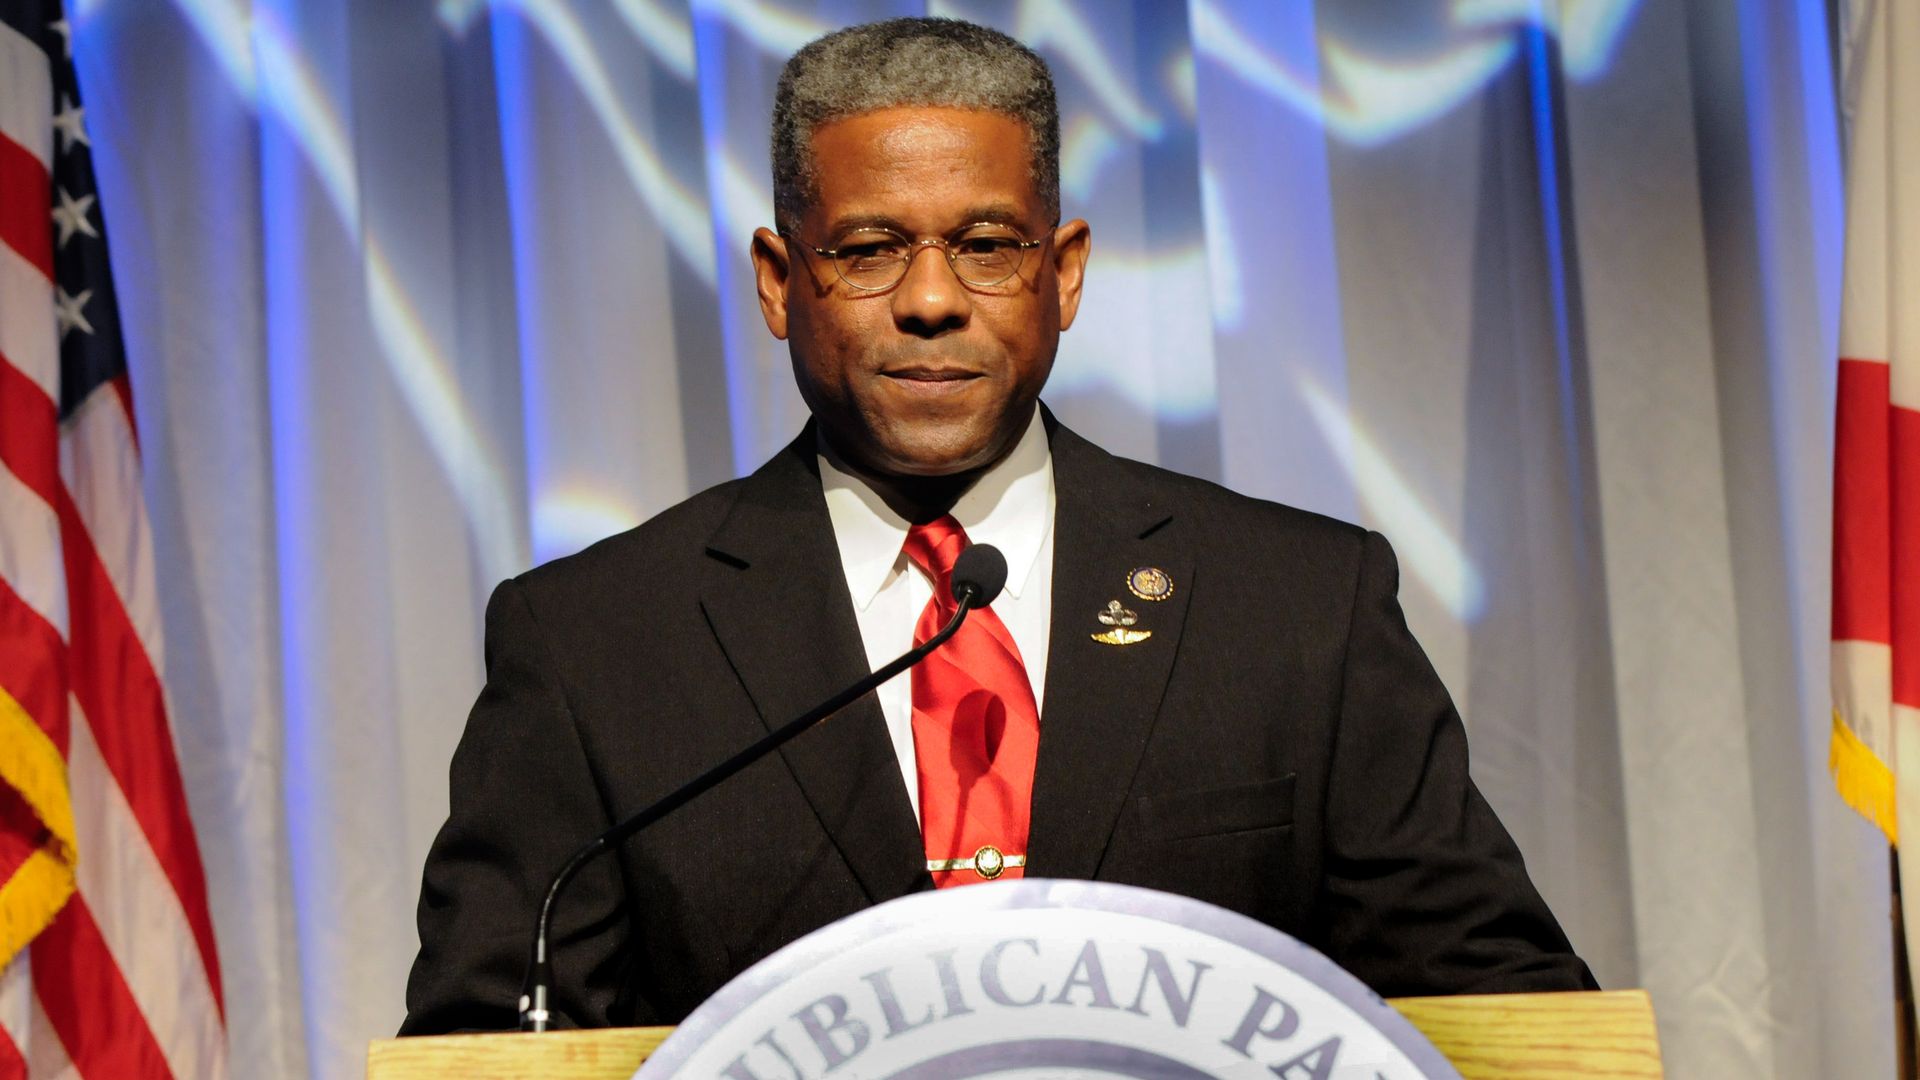 American politician Congressman Allen West hosts the Palm Beach County Republican Party's Lincoln Day Dinner, held at the Kravis Center, West Palm Beach, Florida, February 24, 2011. 